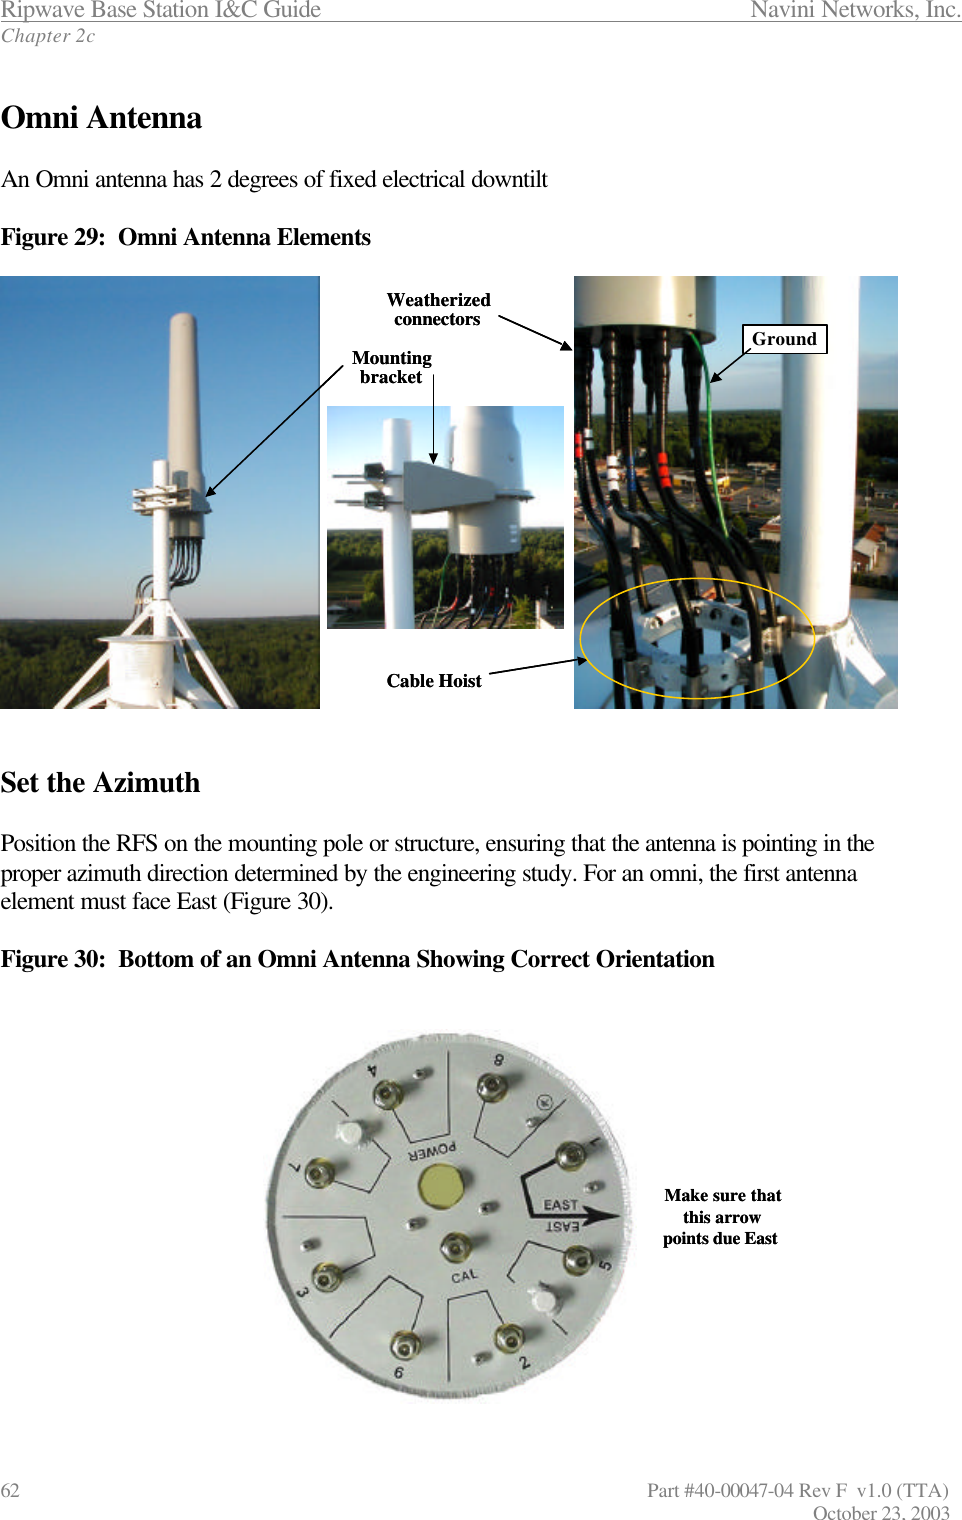 Ripwave Base Station I&amp;C Guide                 Navini Networks, Inc. Chapter 2c 62                  Part #40-00047-04 Rev F  v1.0 (TTA)         October 23, 2003  Omni Antenna  An Omni antenna has 2 degrees of fixed electrical downtilt   Figure 29:  Omni Antenna Elements   Set the Azimuth  Position the RFS on the mounting pole or structure, ensuring that the antenna is pointing in the proper azimuth direction determined by the engineering study. For an omni, the first antenna element must face East (Figure 30).   Figure 30:  Bottom of an Omni Antenna Showing Correct Orientation  Make sure thatthis arrowpoints due East Make sure thatthis arrowpoints due East WeatherizedconnectorsMountingbracketGroundCable HoistWeatherizedconnectorsMountingbracketGroundCable Hoist